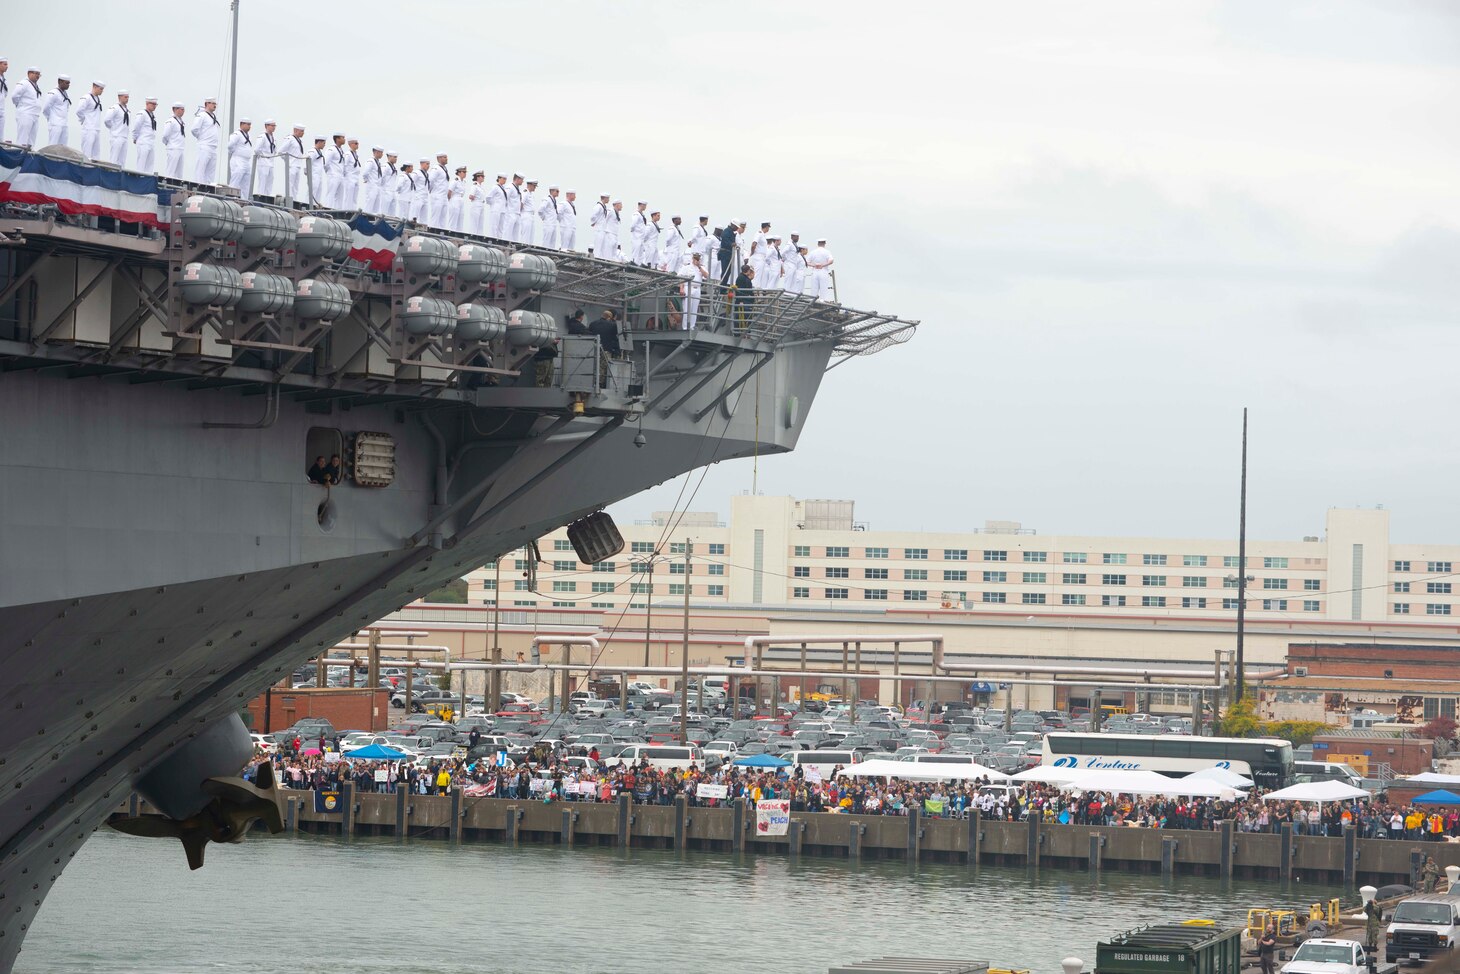 NORFOLK (Oct. 13, 2022) – The Wasp-class amphibious assault ship USS Kearsarge (LHD 3), returns to Naval Station Norfolk after a seven-month deployment, Oct. 13. More than 4,000 Sailors and Marines assigned to the Kearsarge Amphibious Ready Group (ARG) supported a wide range of interoperability opportunities and exercises across the U.S. Sixth Fleet area of operations increasing combat readiness and crisis response capabilities while strengthening relationships with both NATO Allies and partners. (U.S. Navy Photo by Mass Communication Specialist Seaman Aaron Arroyo)